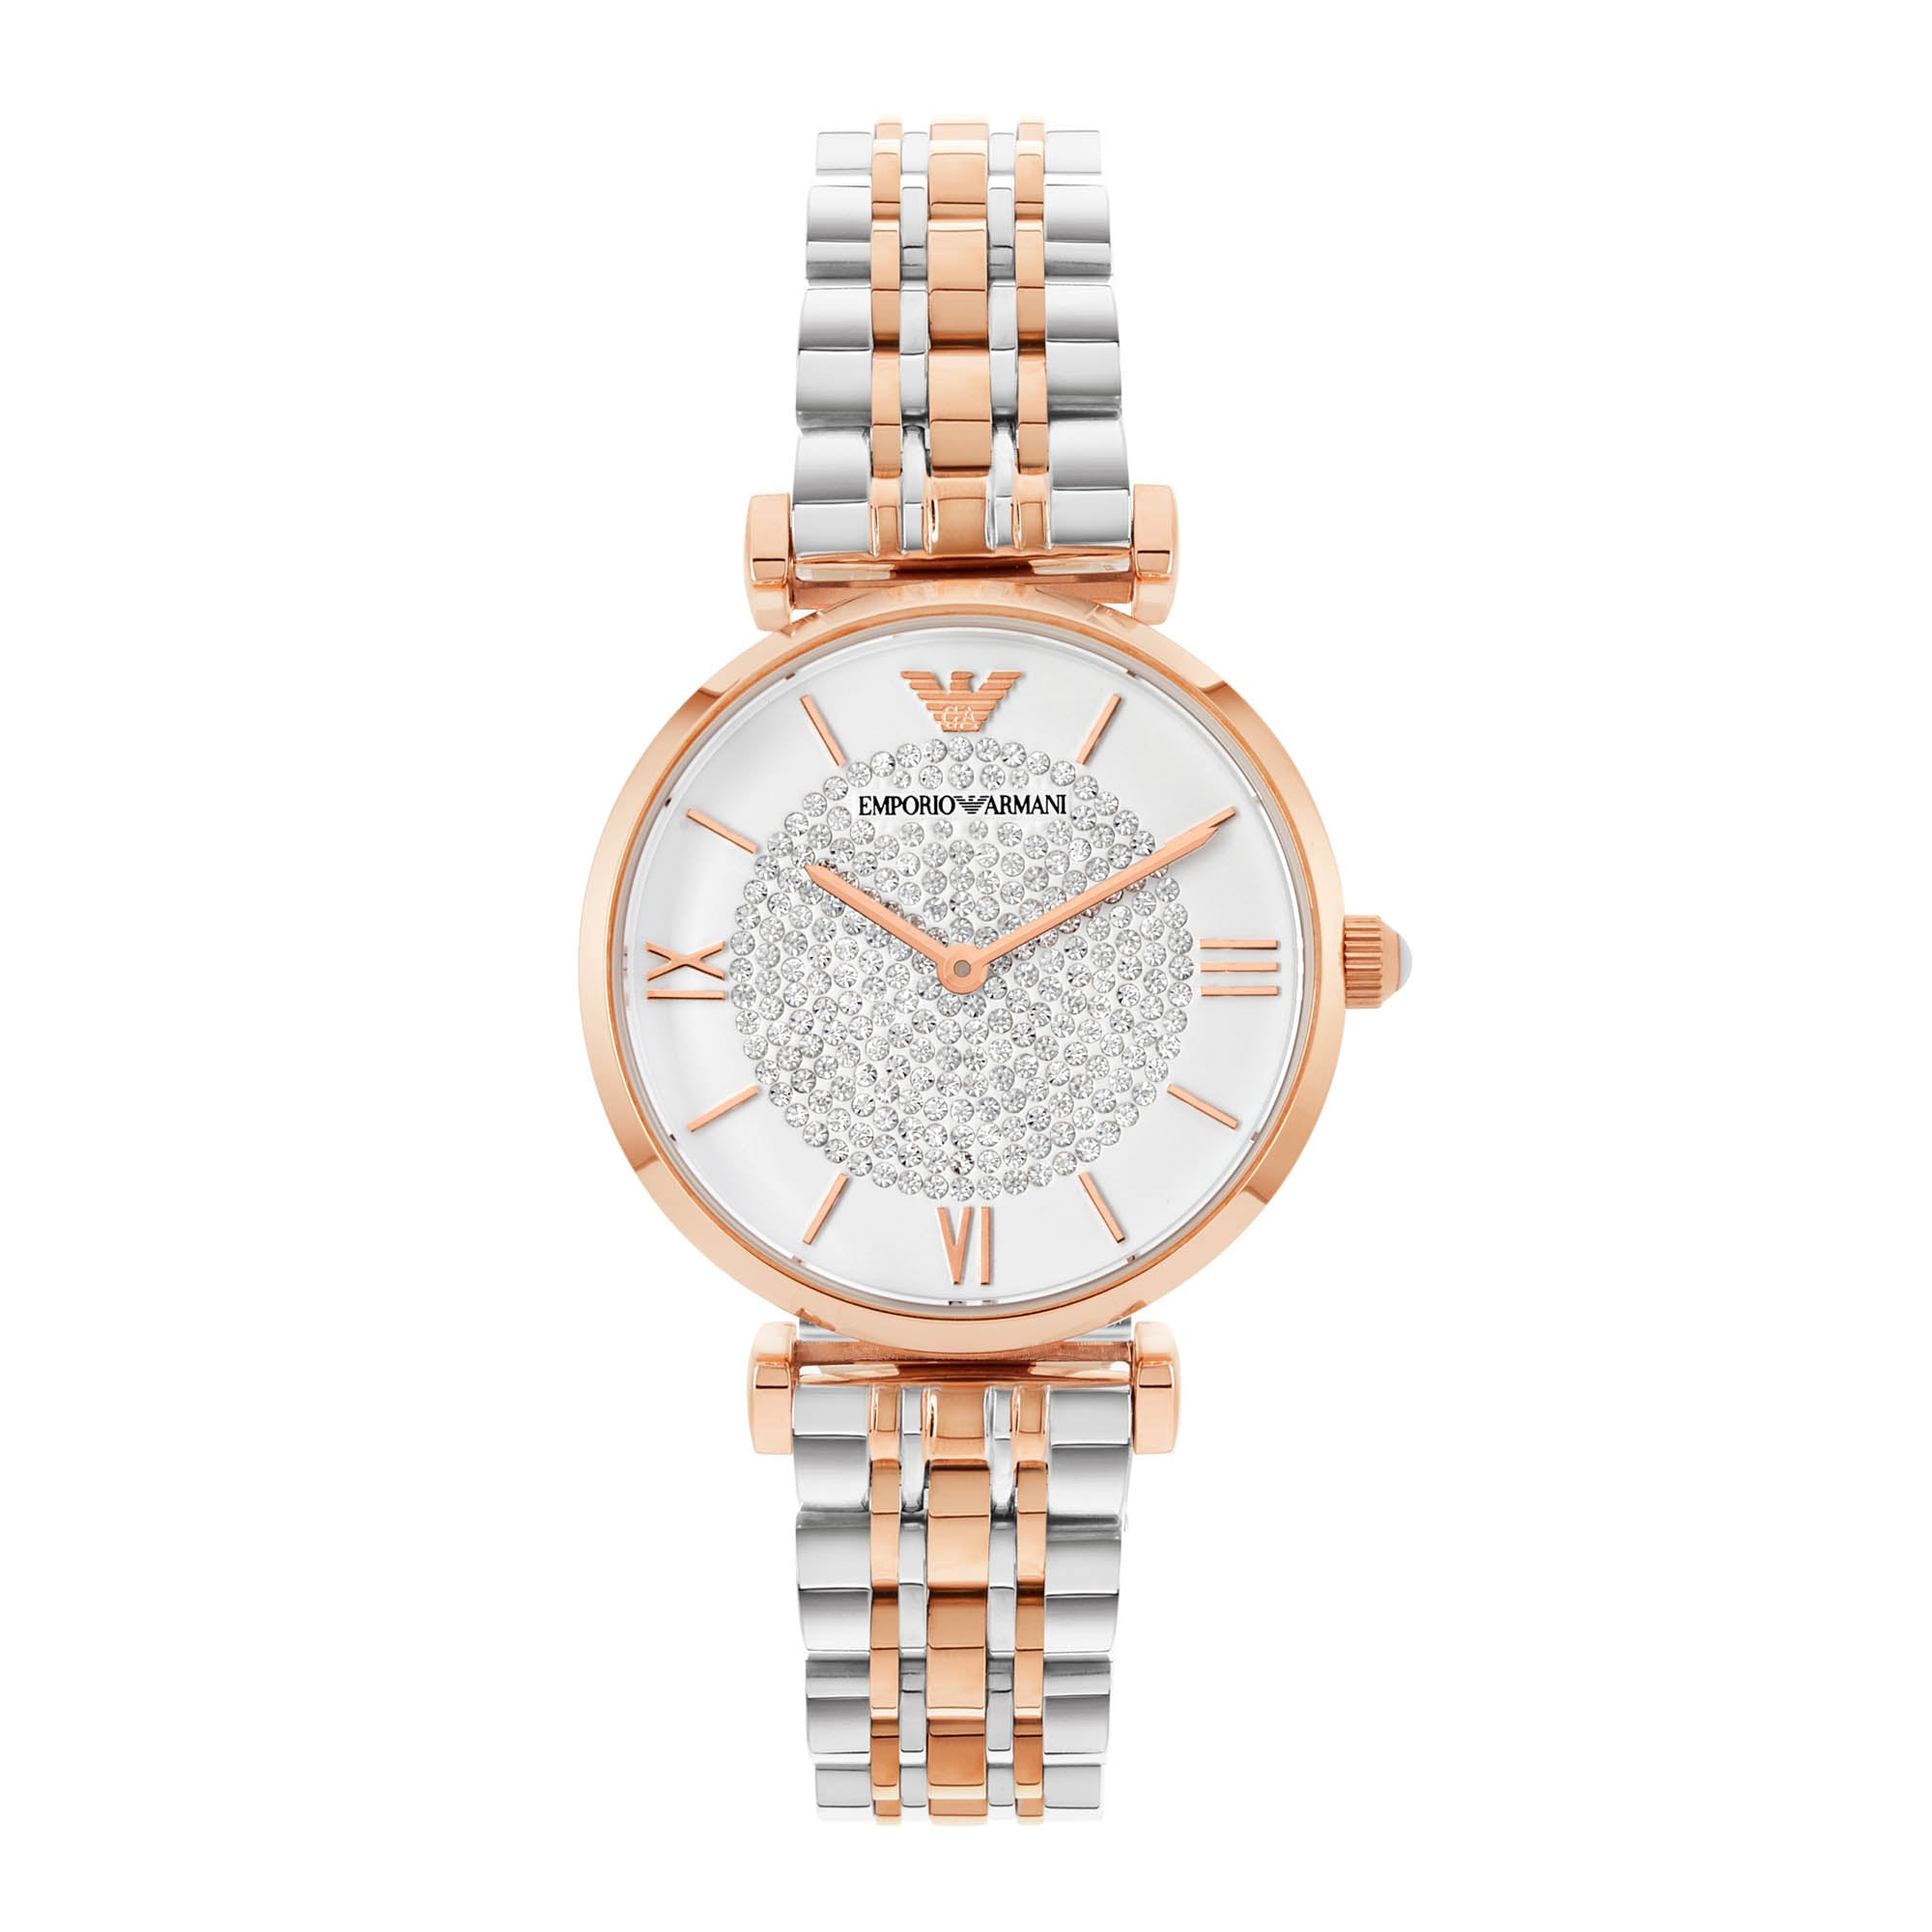 Emporio Armani Gianni T-Bar Watch Rose Gold AR1926 - Front